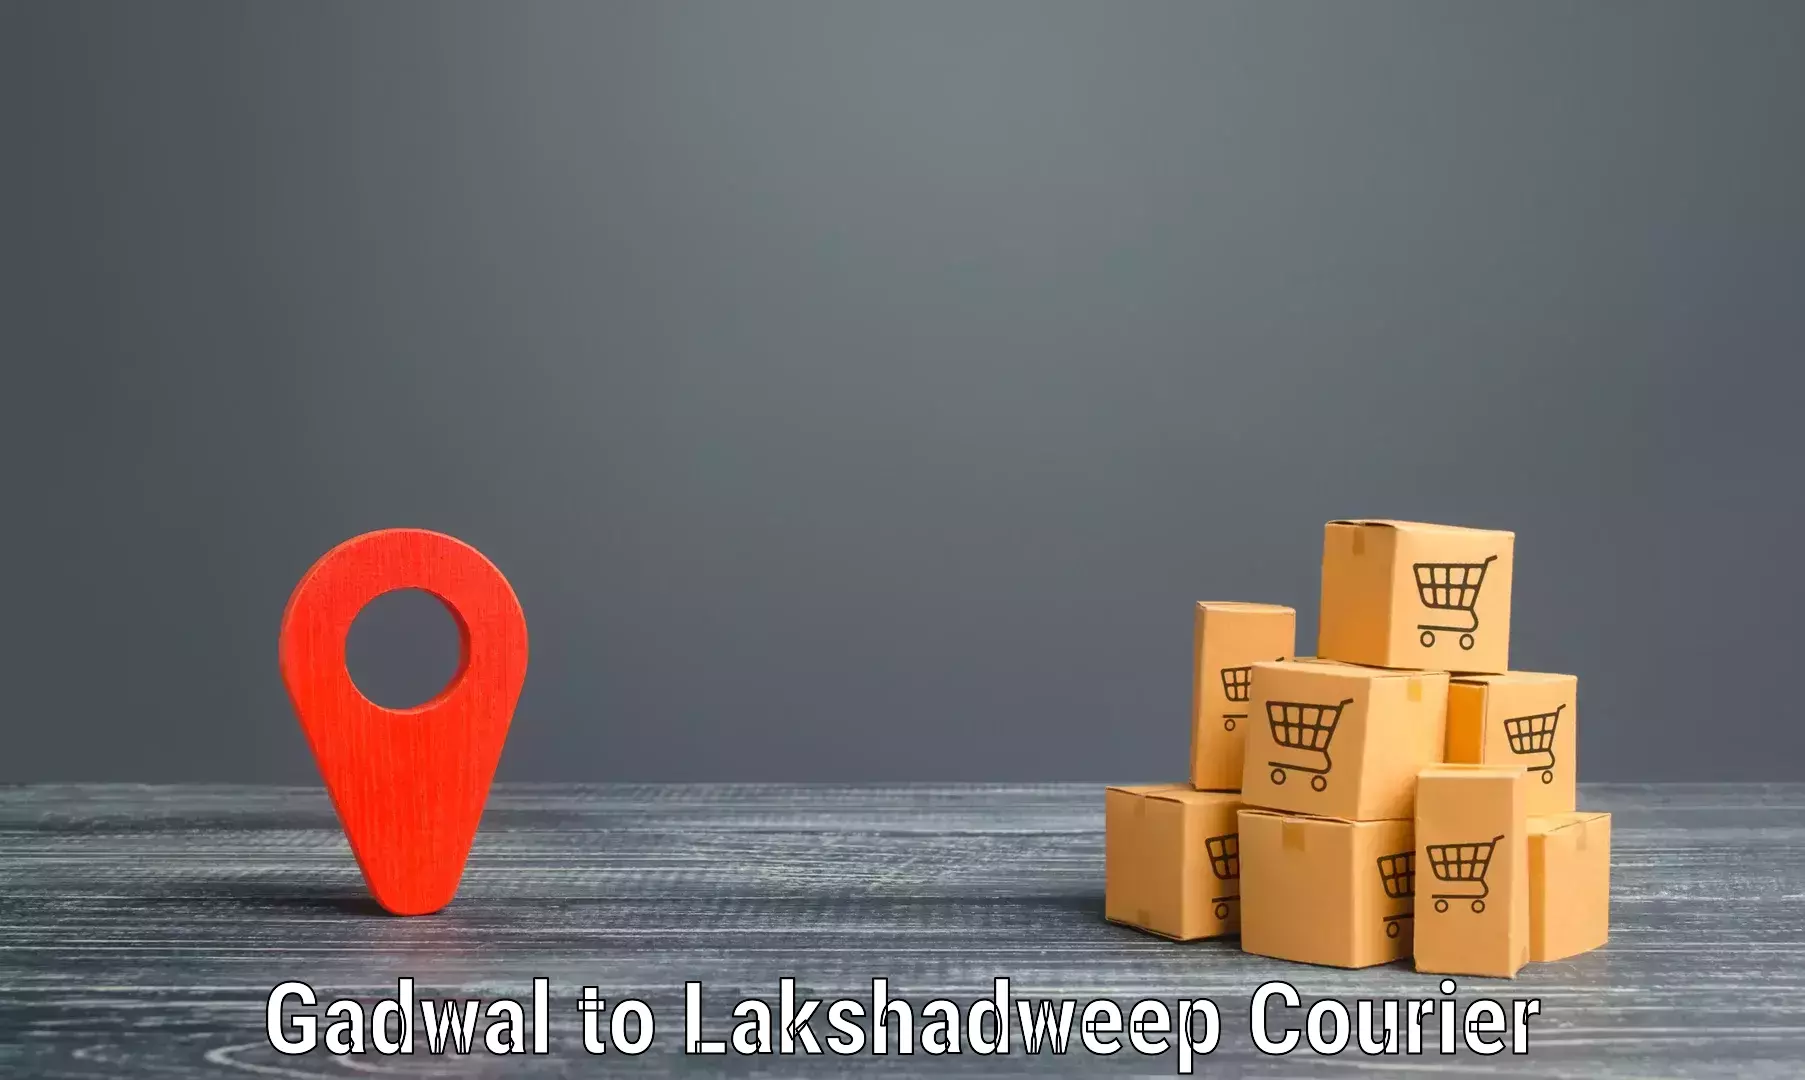 Express delivery network Gadwal to Lakshadweep